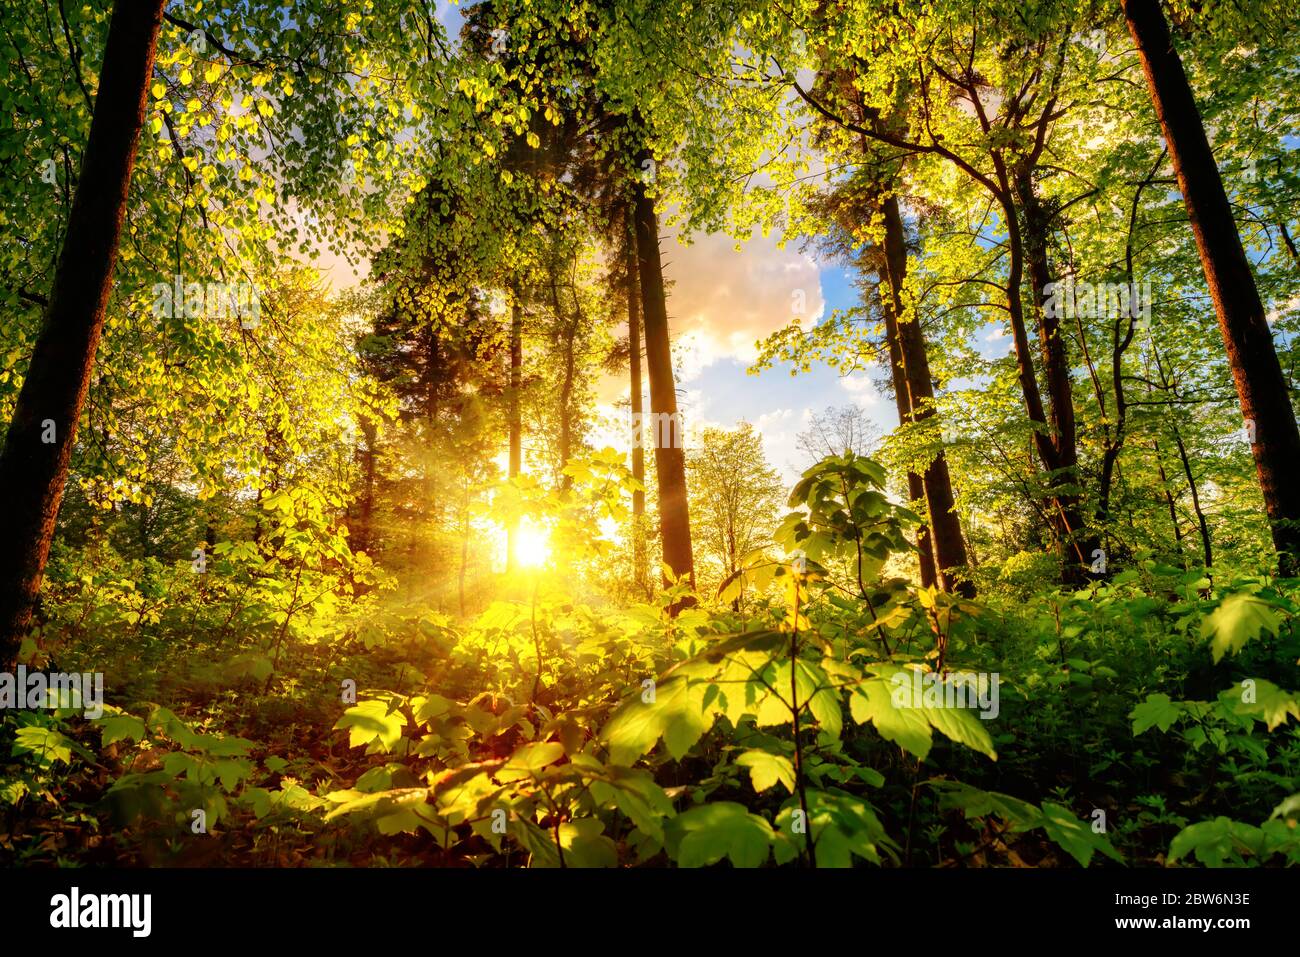 Luminous scenery in a forest clearing or park, with the foliage nicely illuminated by the warm sunset light Stock Photo